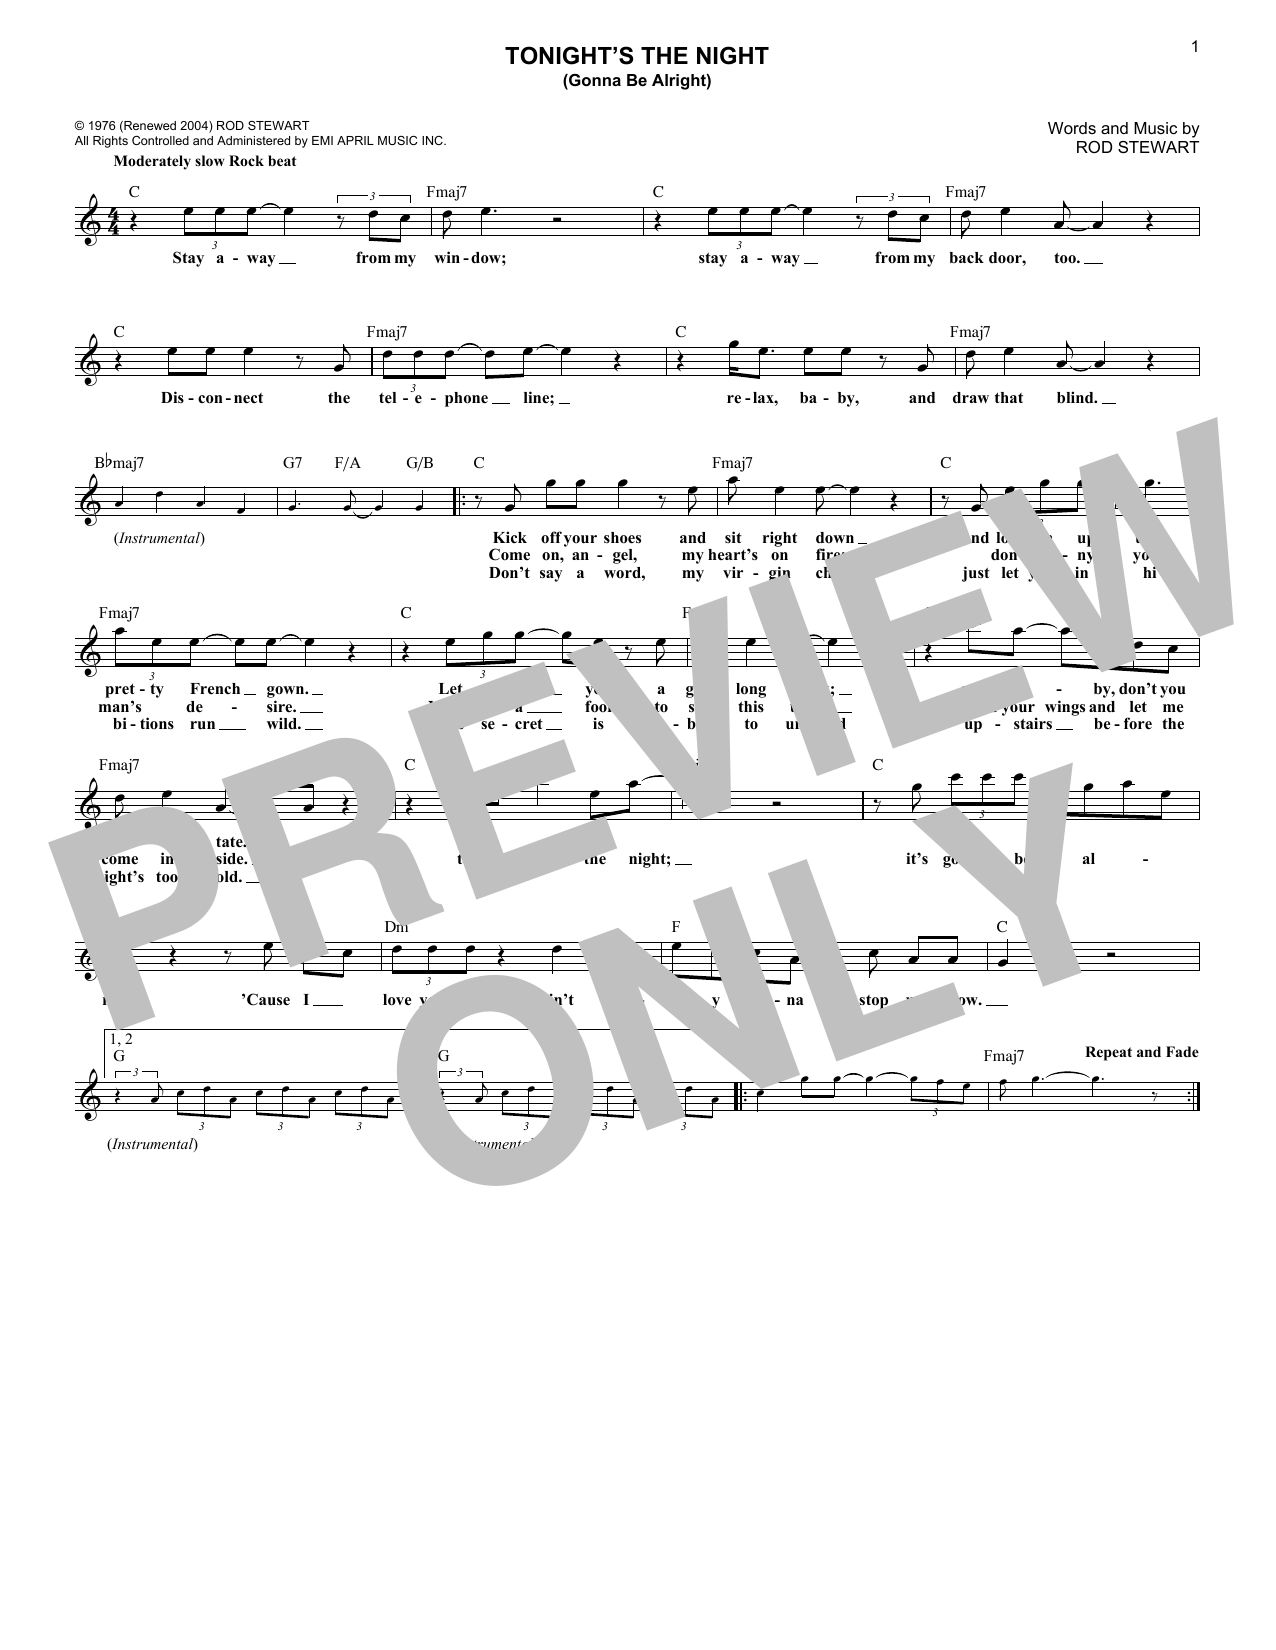 Download Rod Stewart Tonight's The Night (Gonna Be Alright) Sheet Music